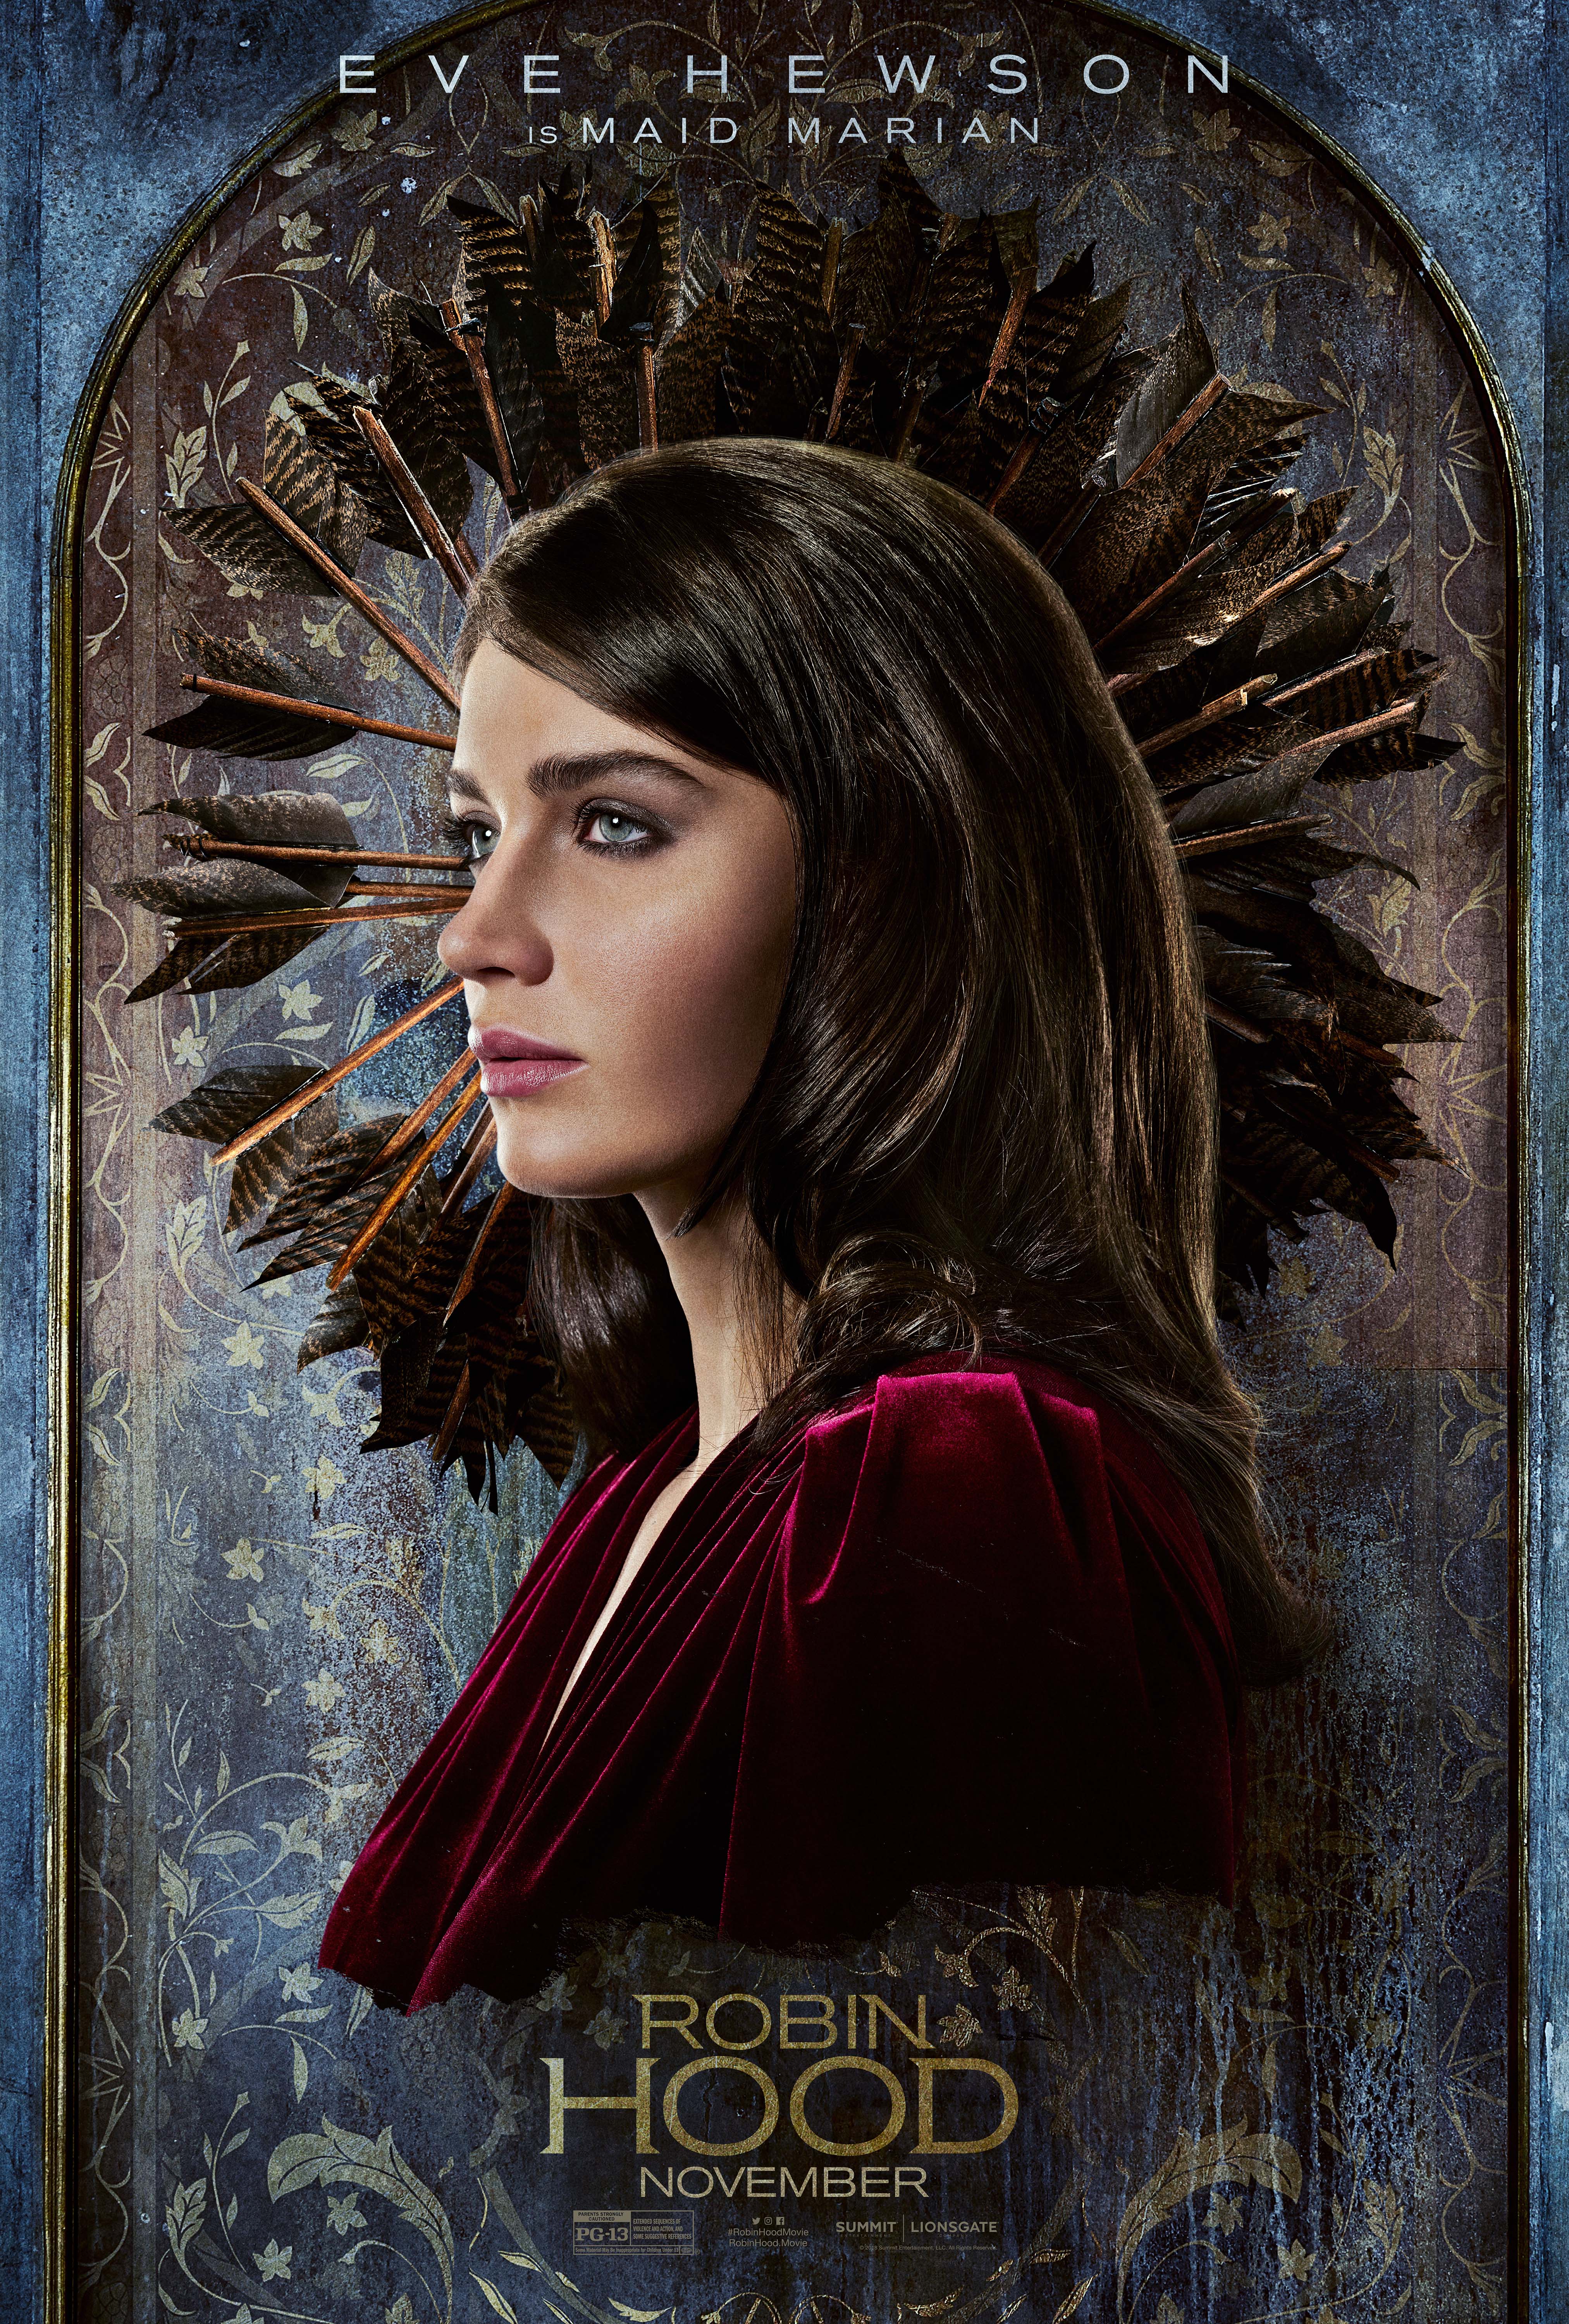 Maid Marian character poster (Lionsgate)